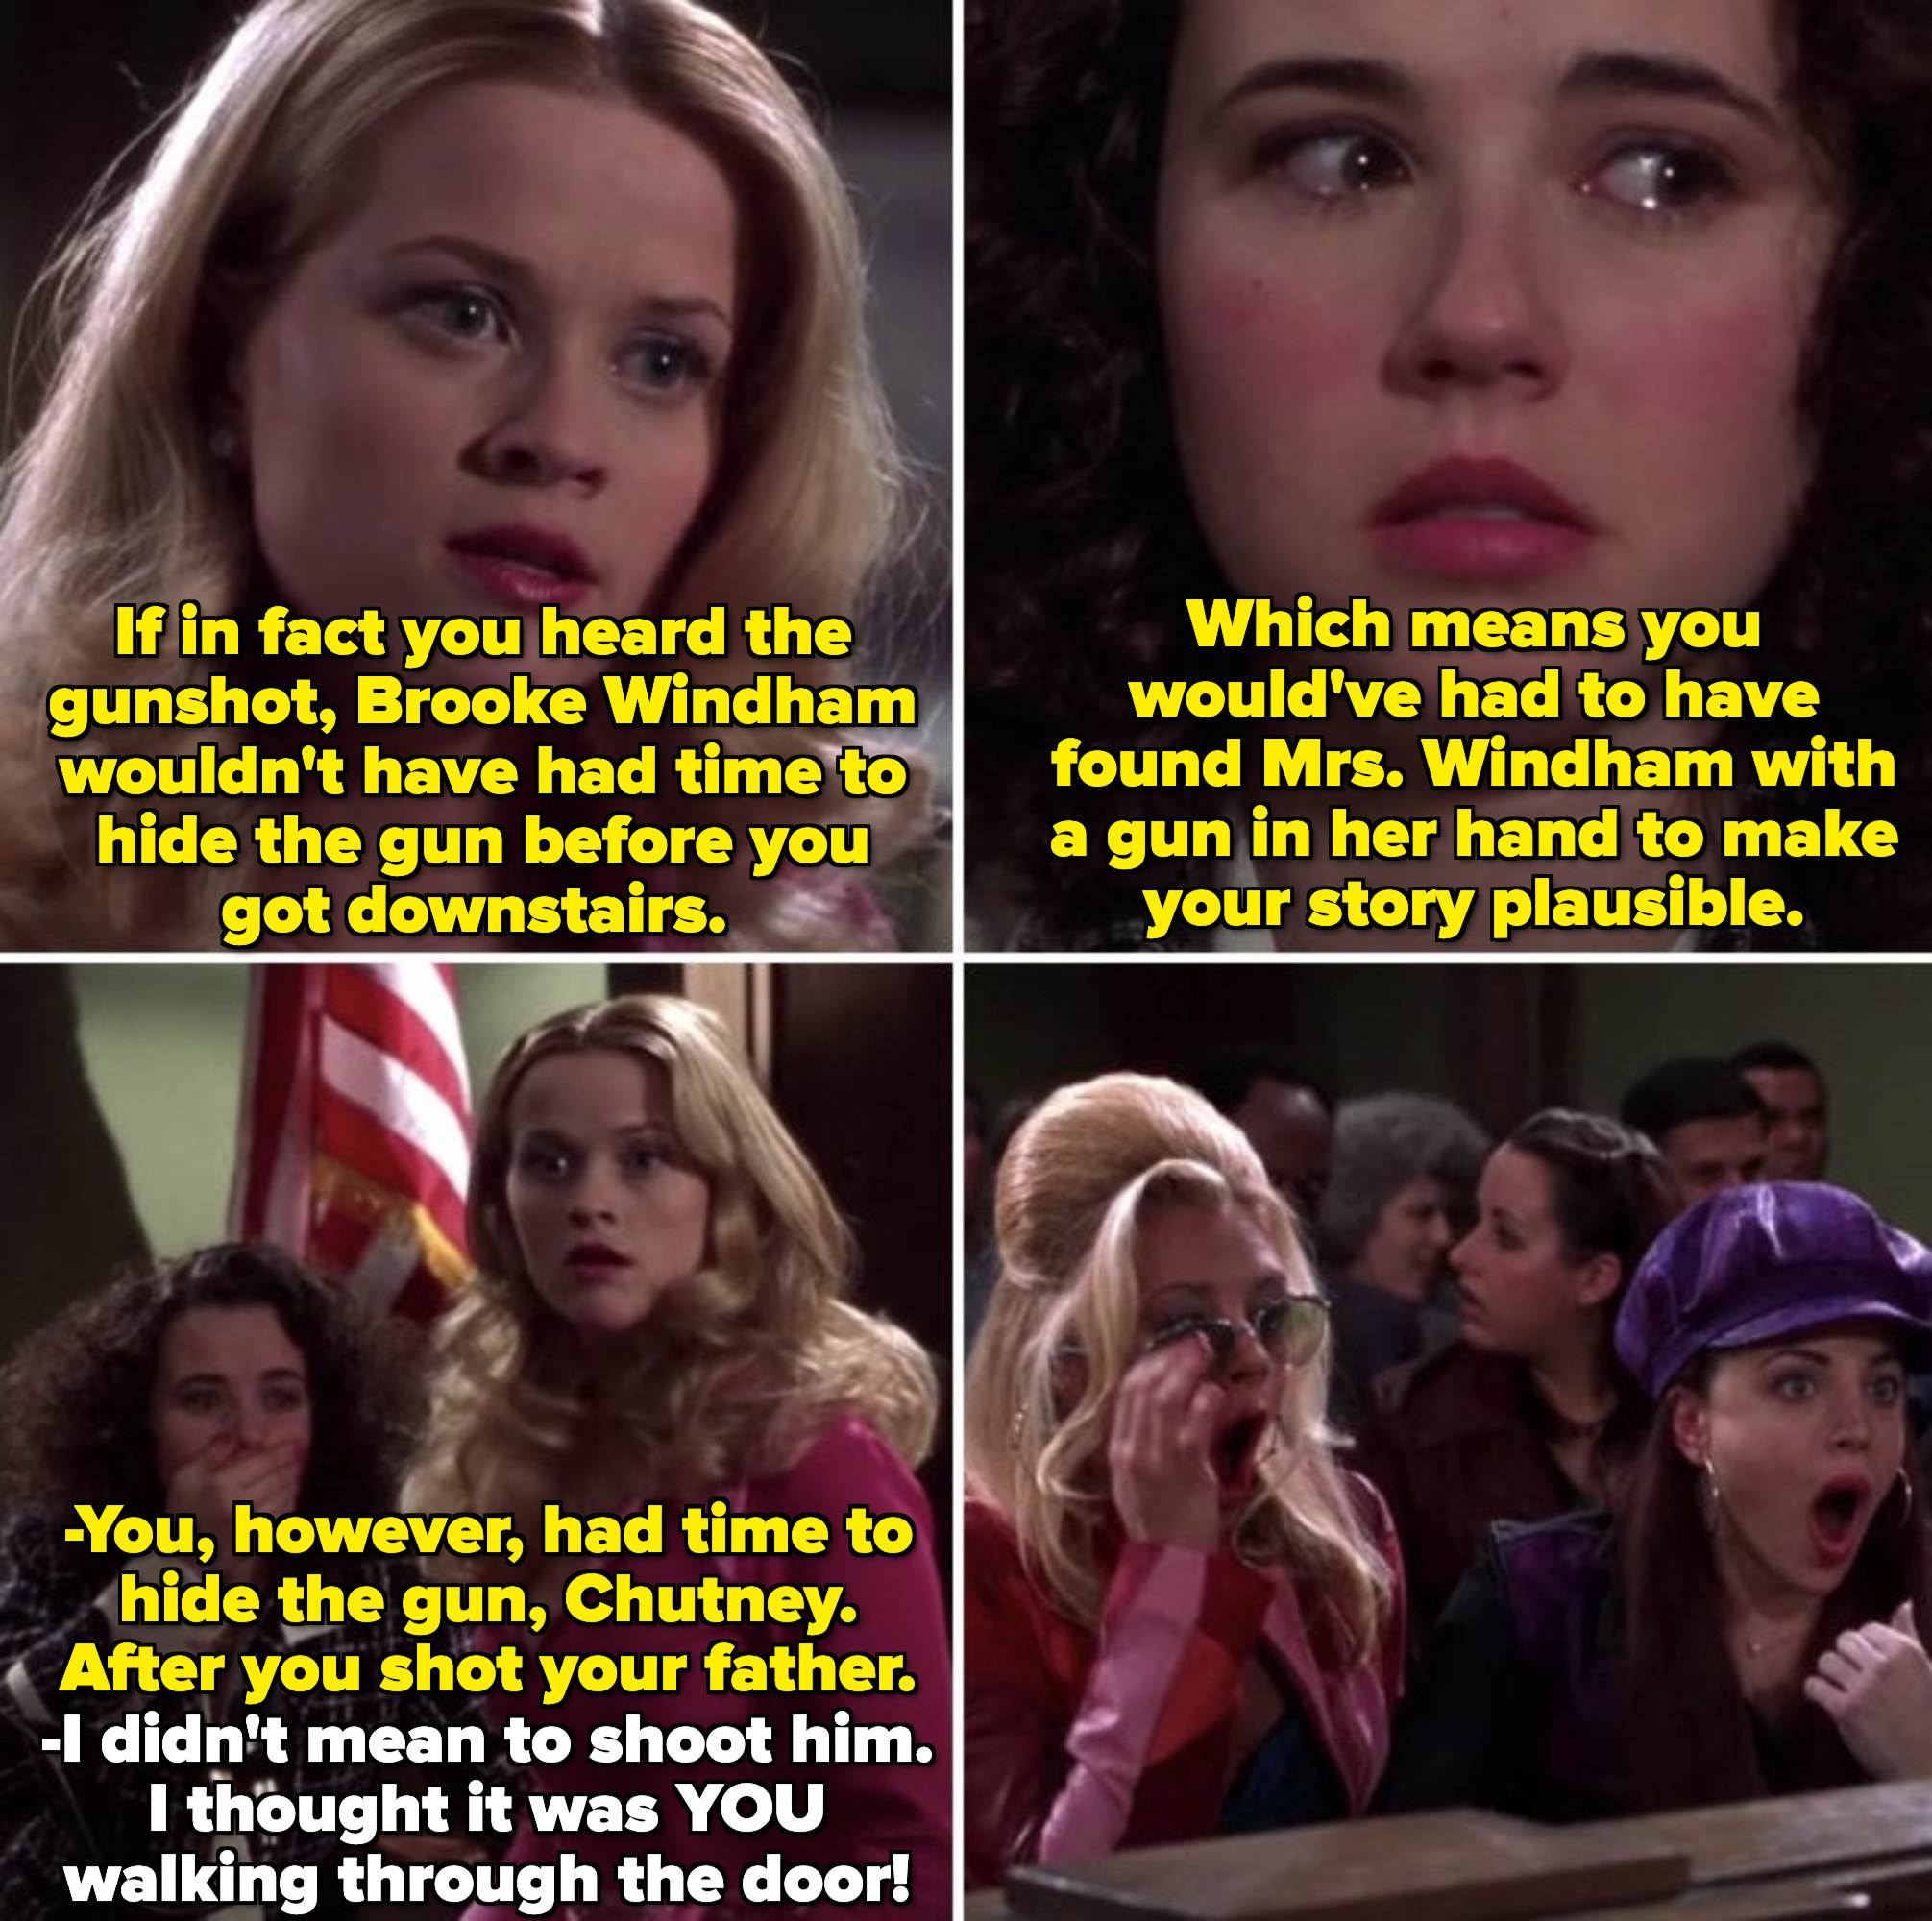 Elle cross-examining Chutney in the courtroom with determination, drilling her with logic, while Chutney has a scared expression on her face. Chutney admits to shooting her father, and the entire courtroom is shocked